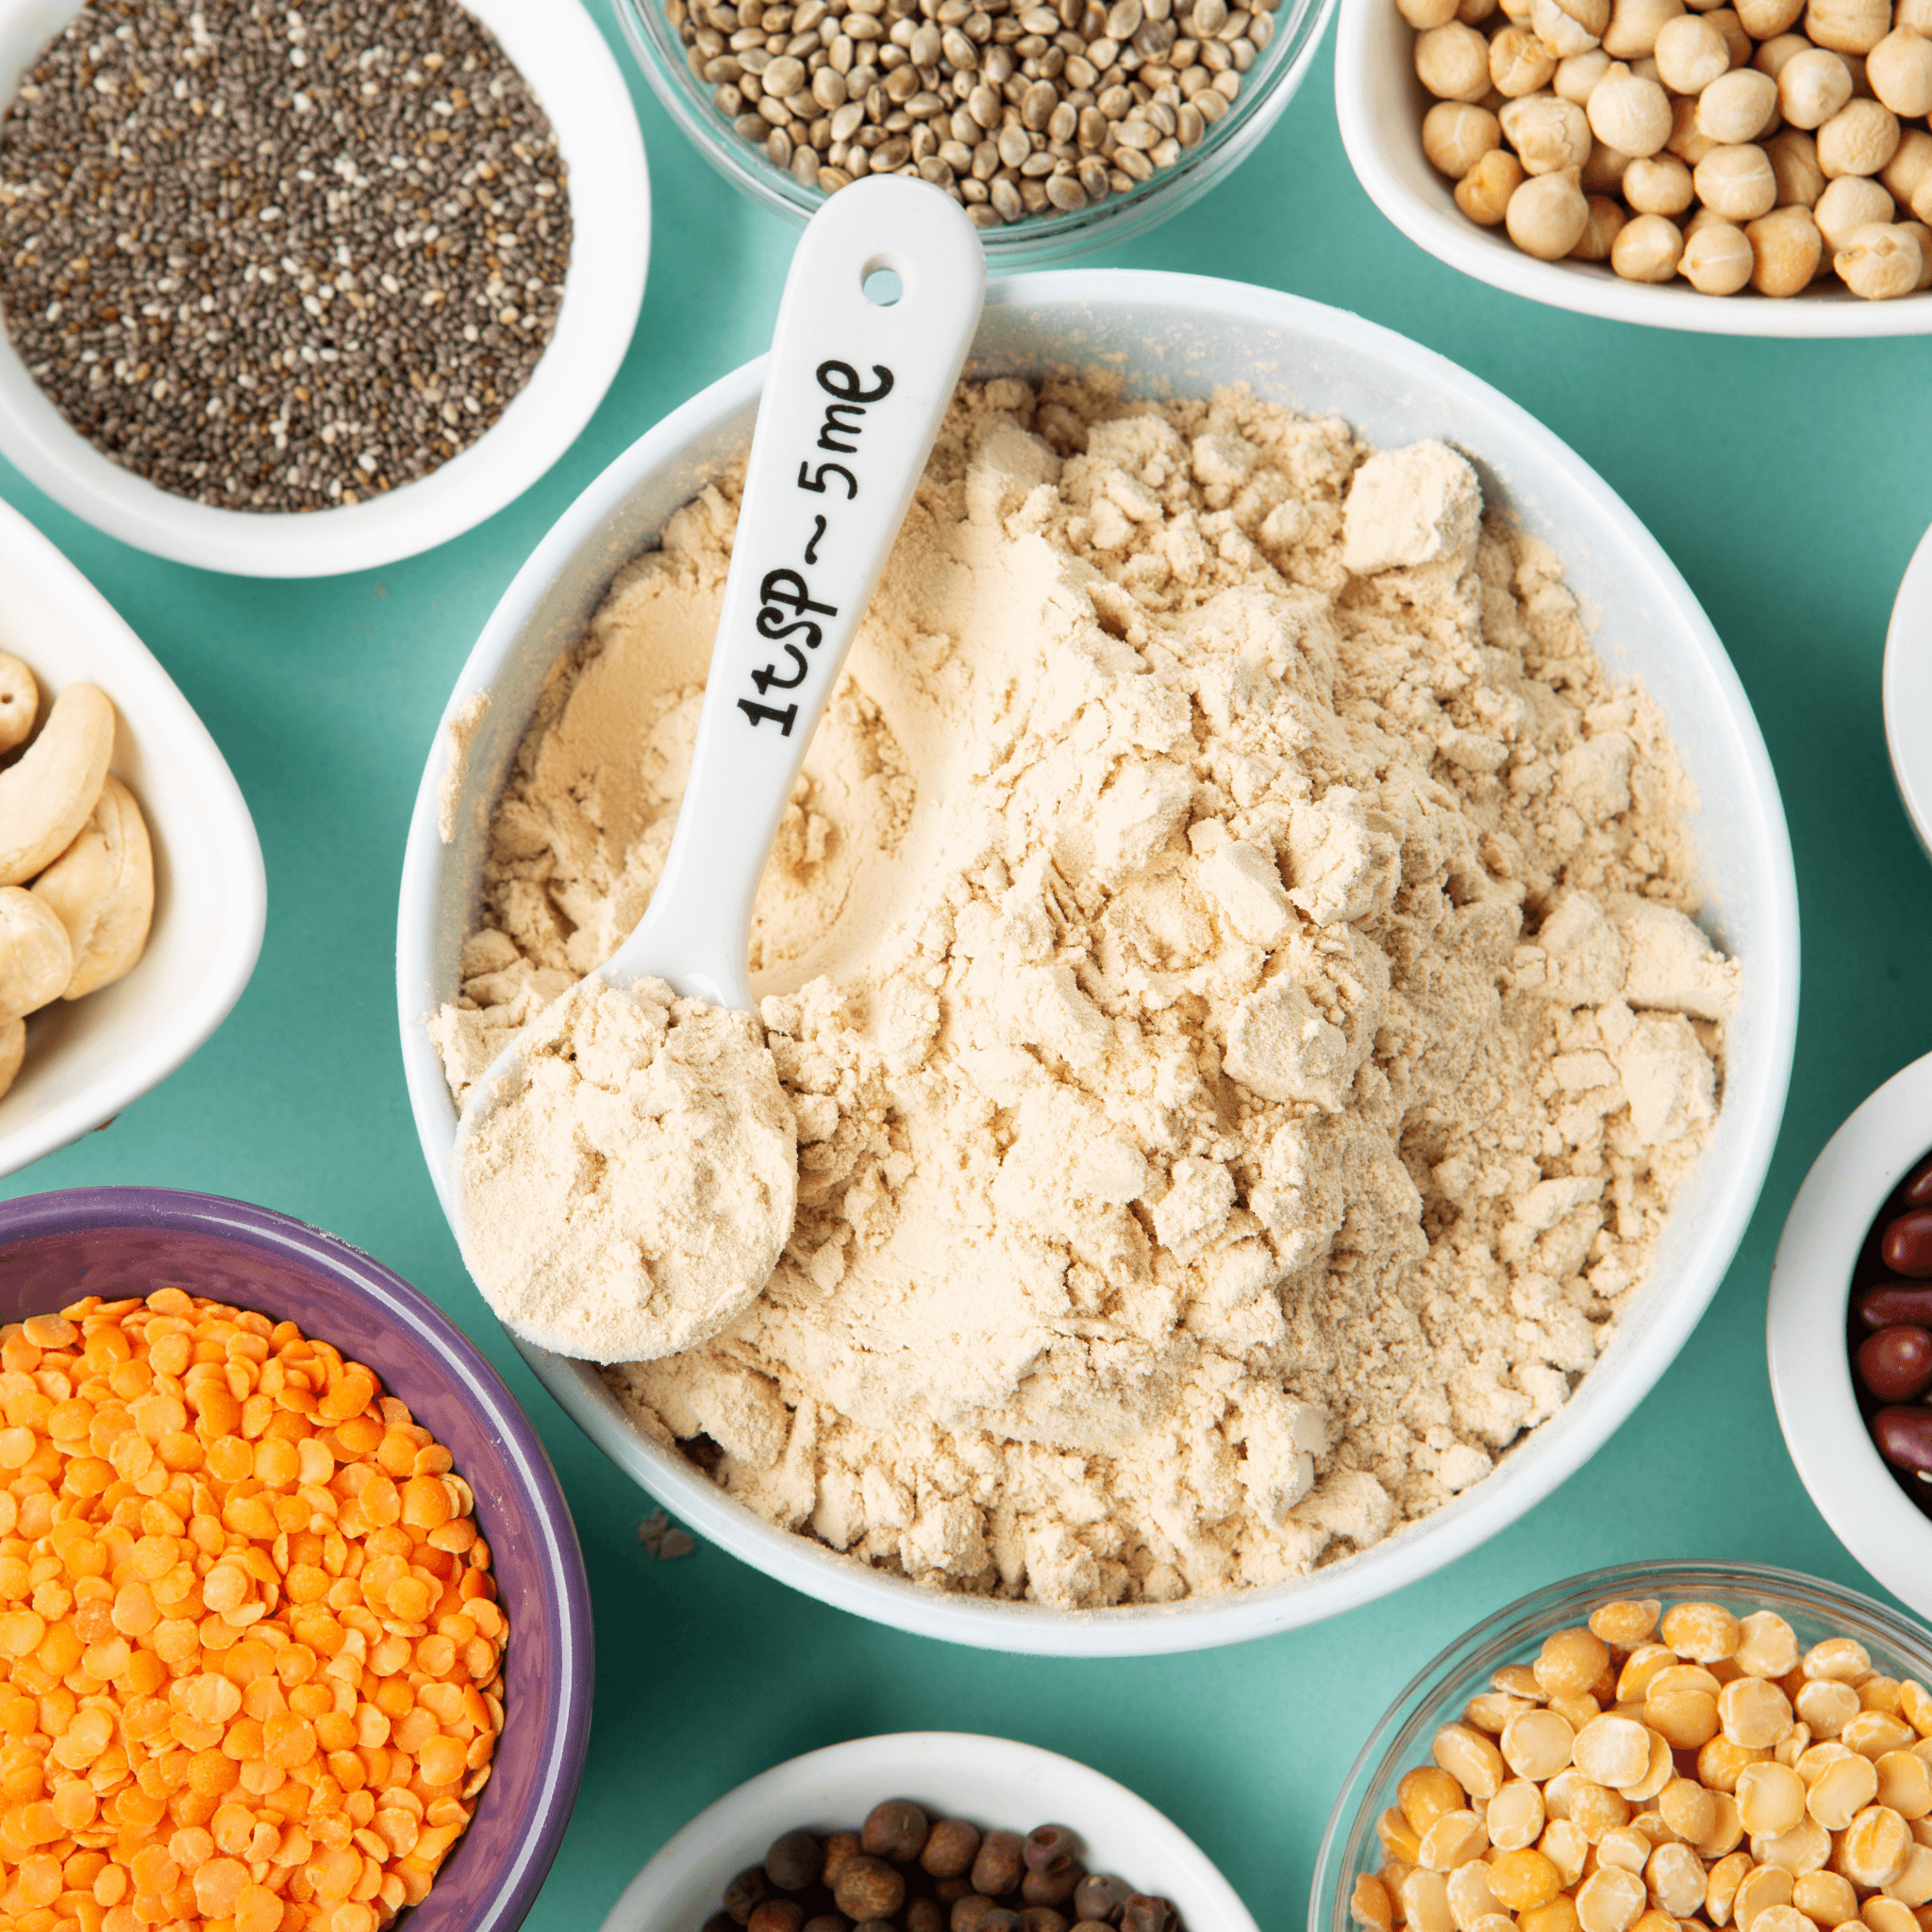 What Are Plant-Based Protein Foods?